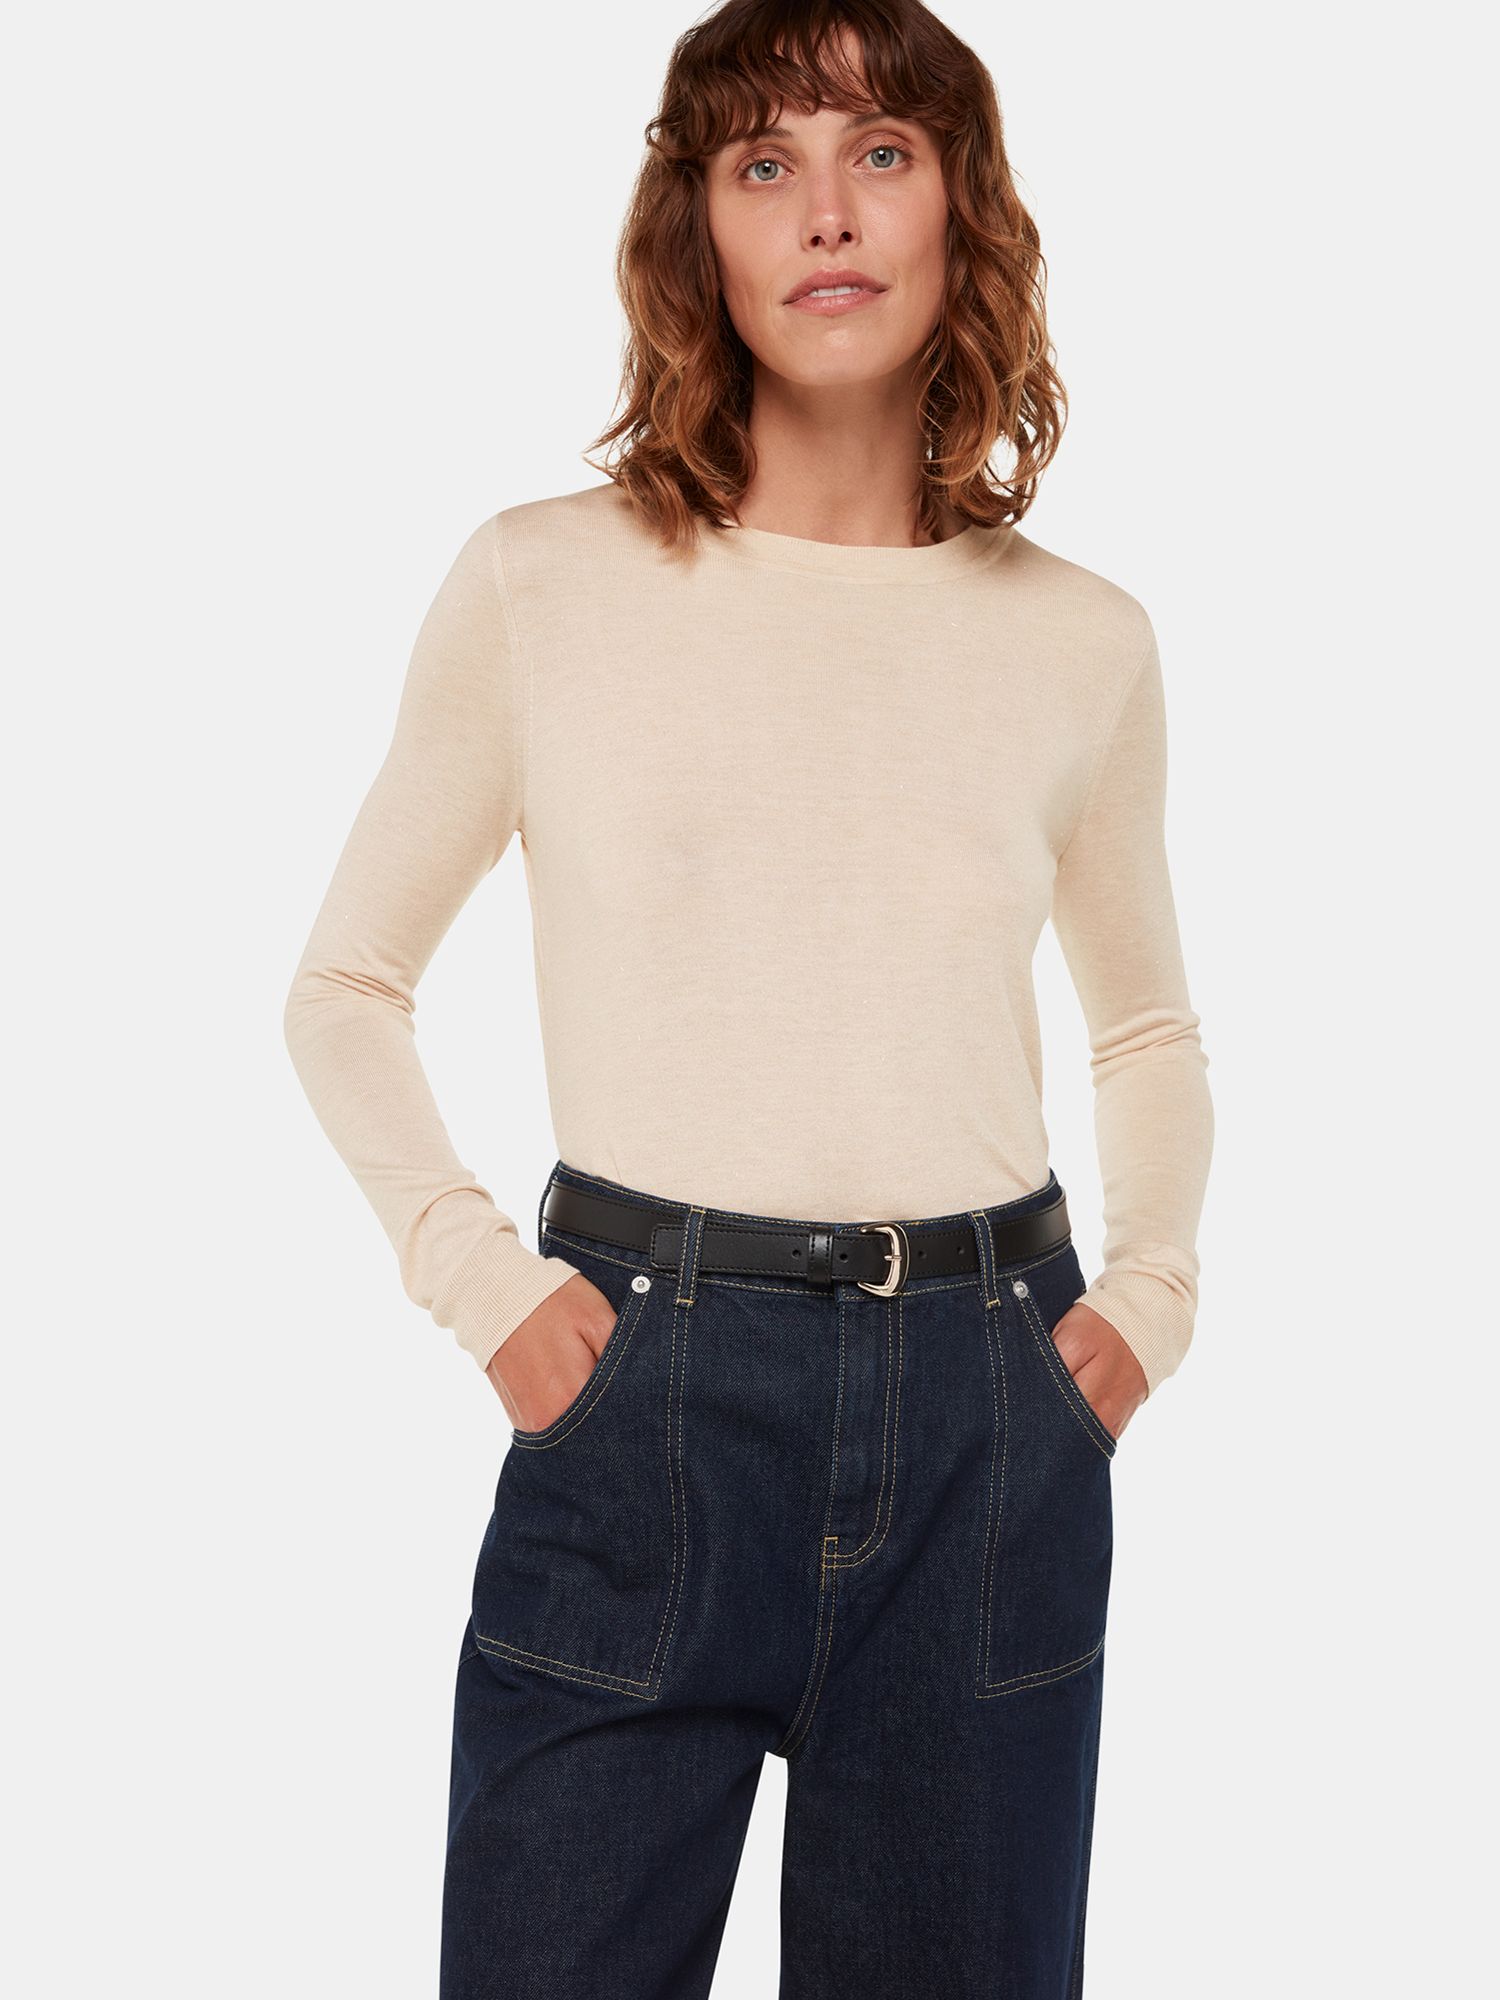 Whistles Annie Sparkle Crew Neck Jumper, Ivory at John Lewis & Partners